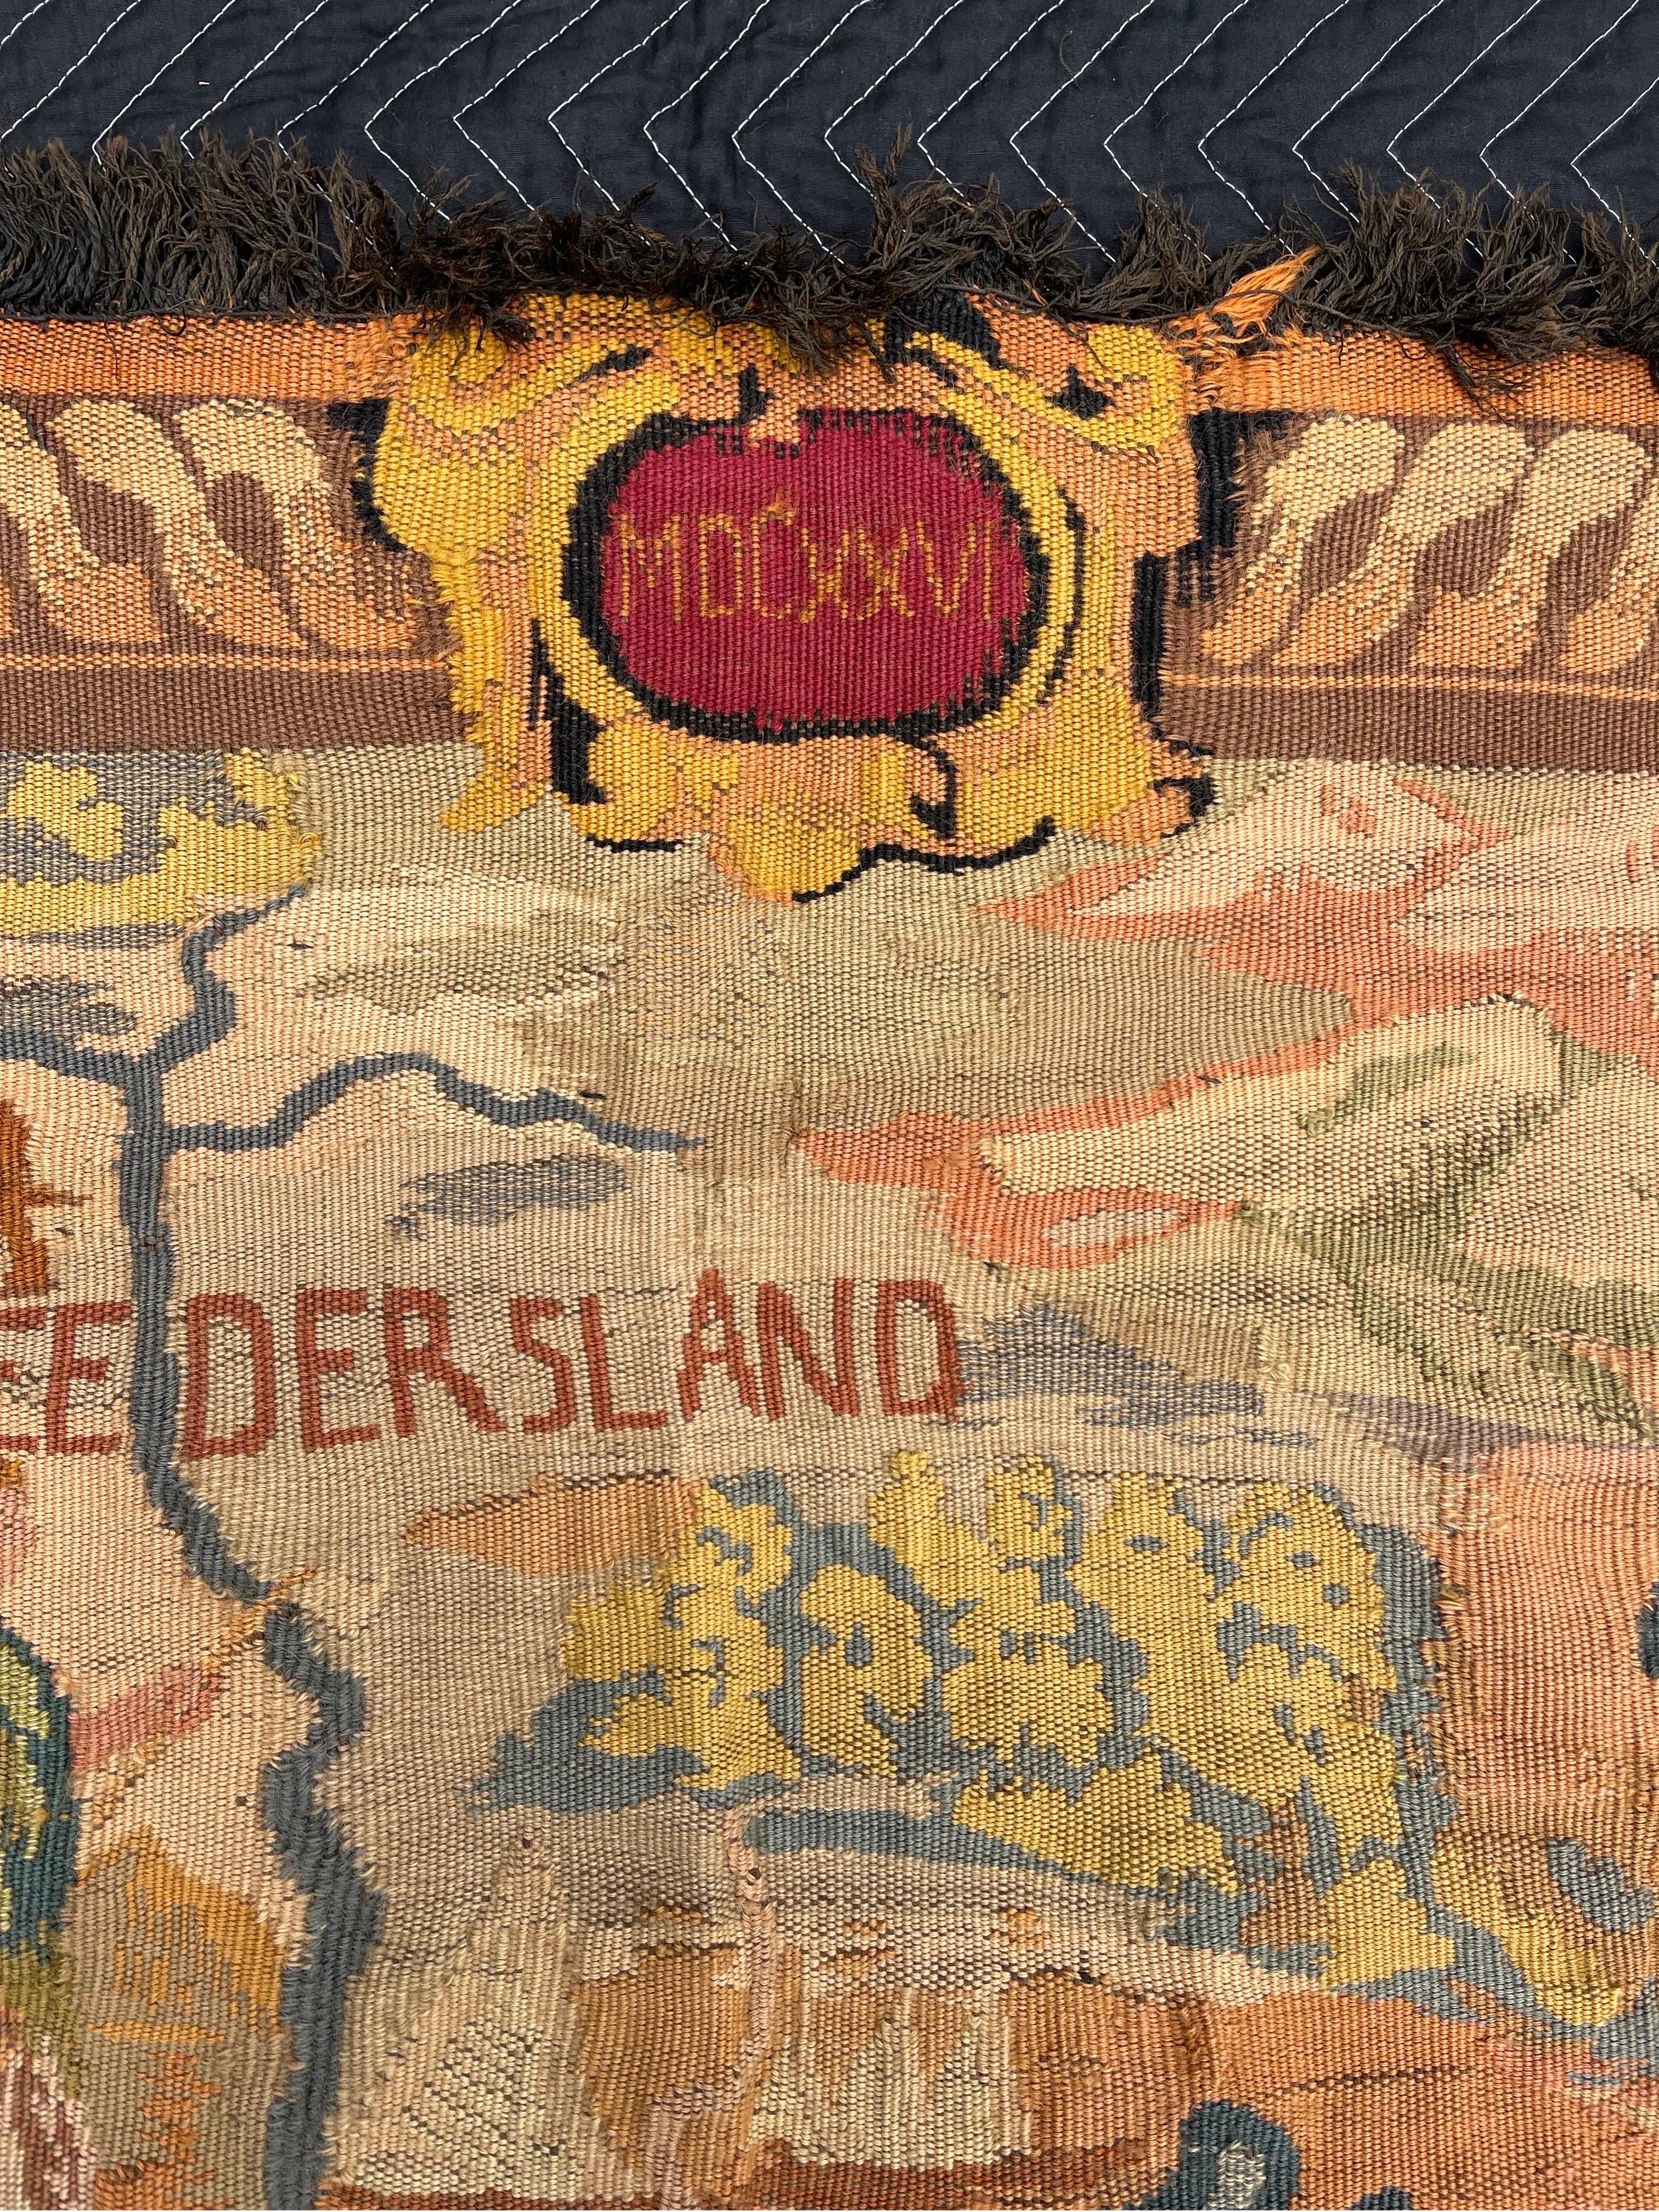 c.1900 Handwoven French Tapestry Map New Netherlands, Amsterdam, 1626 New York For Sale 2